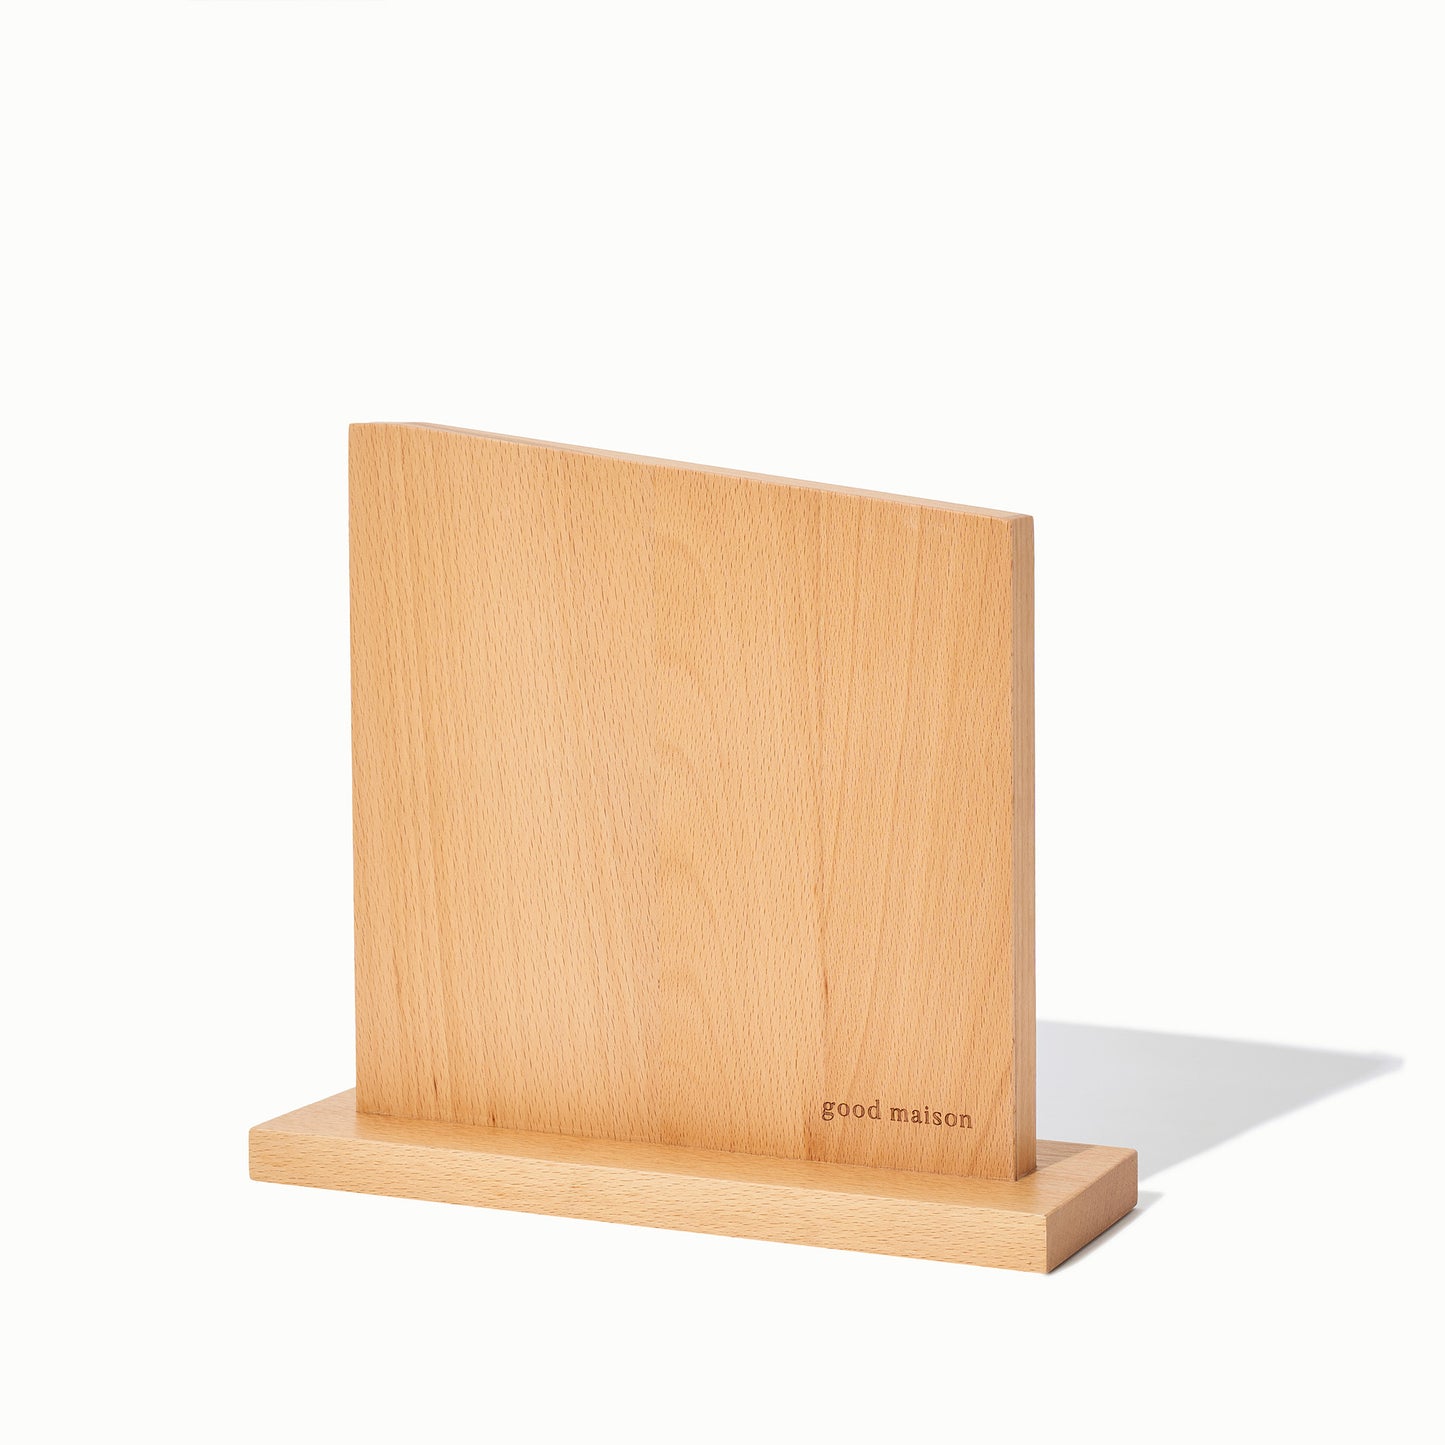 The Knife Stand